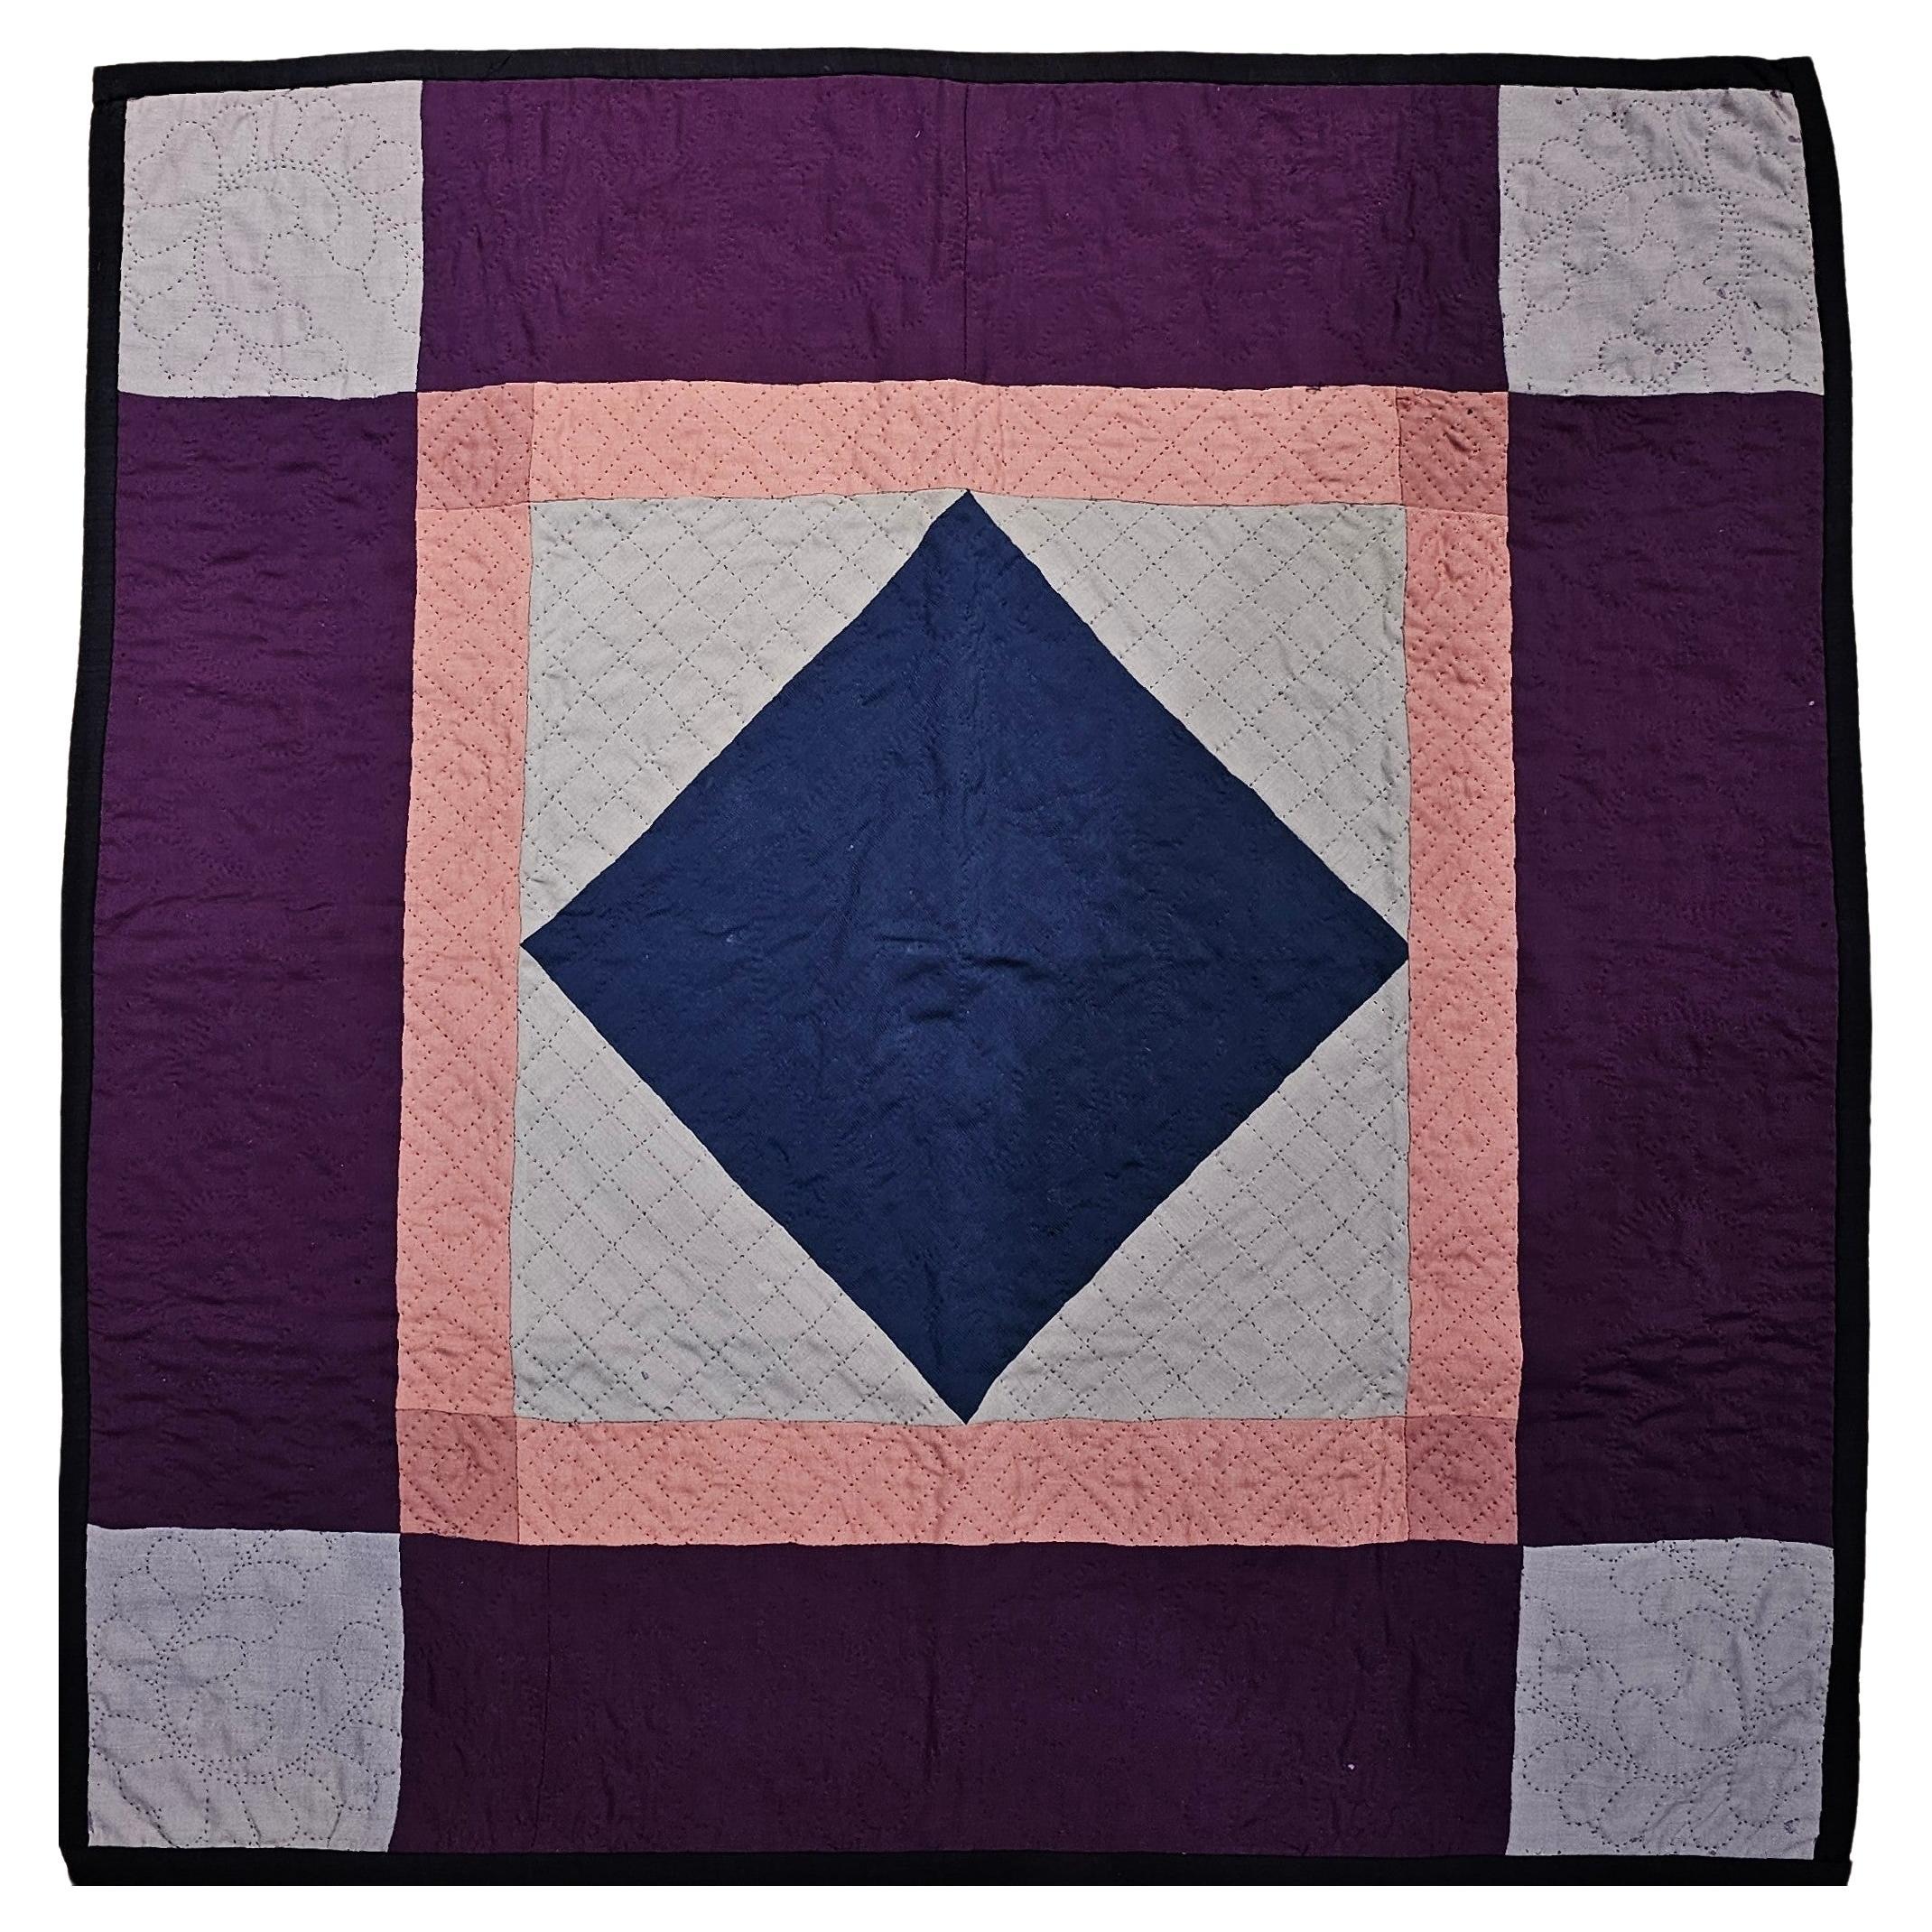 19th Century Hand Stitched American Amish Crib Quilt in Pink, Ivory, Navy Blue